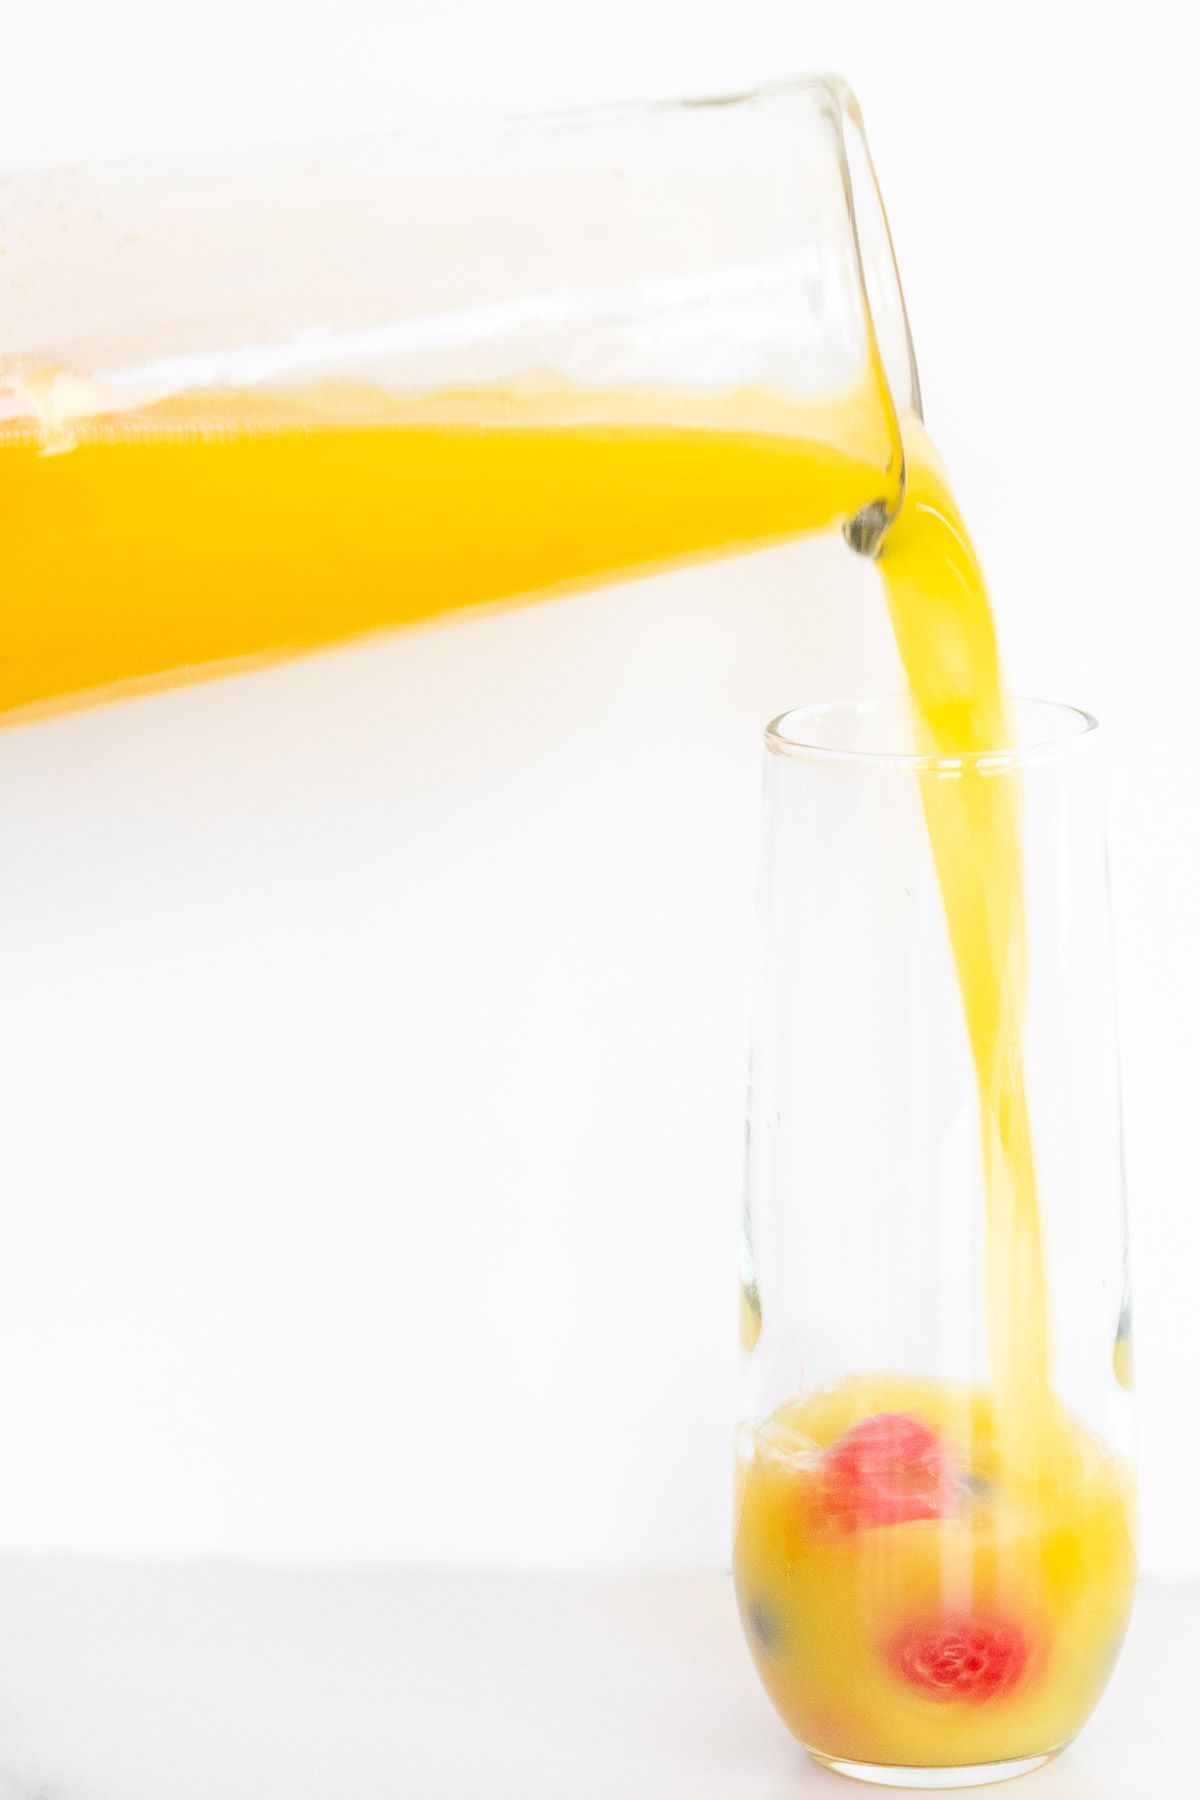 Bottomless mimosa pitcher pouring into a glass with fruit